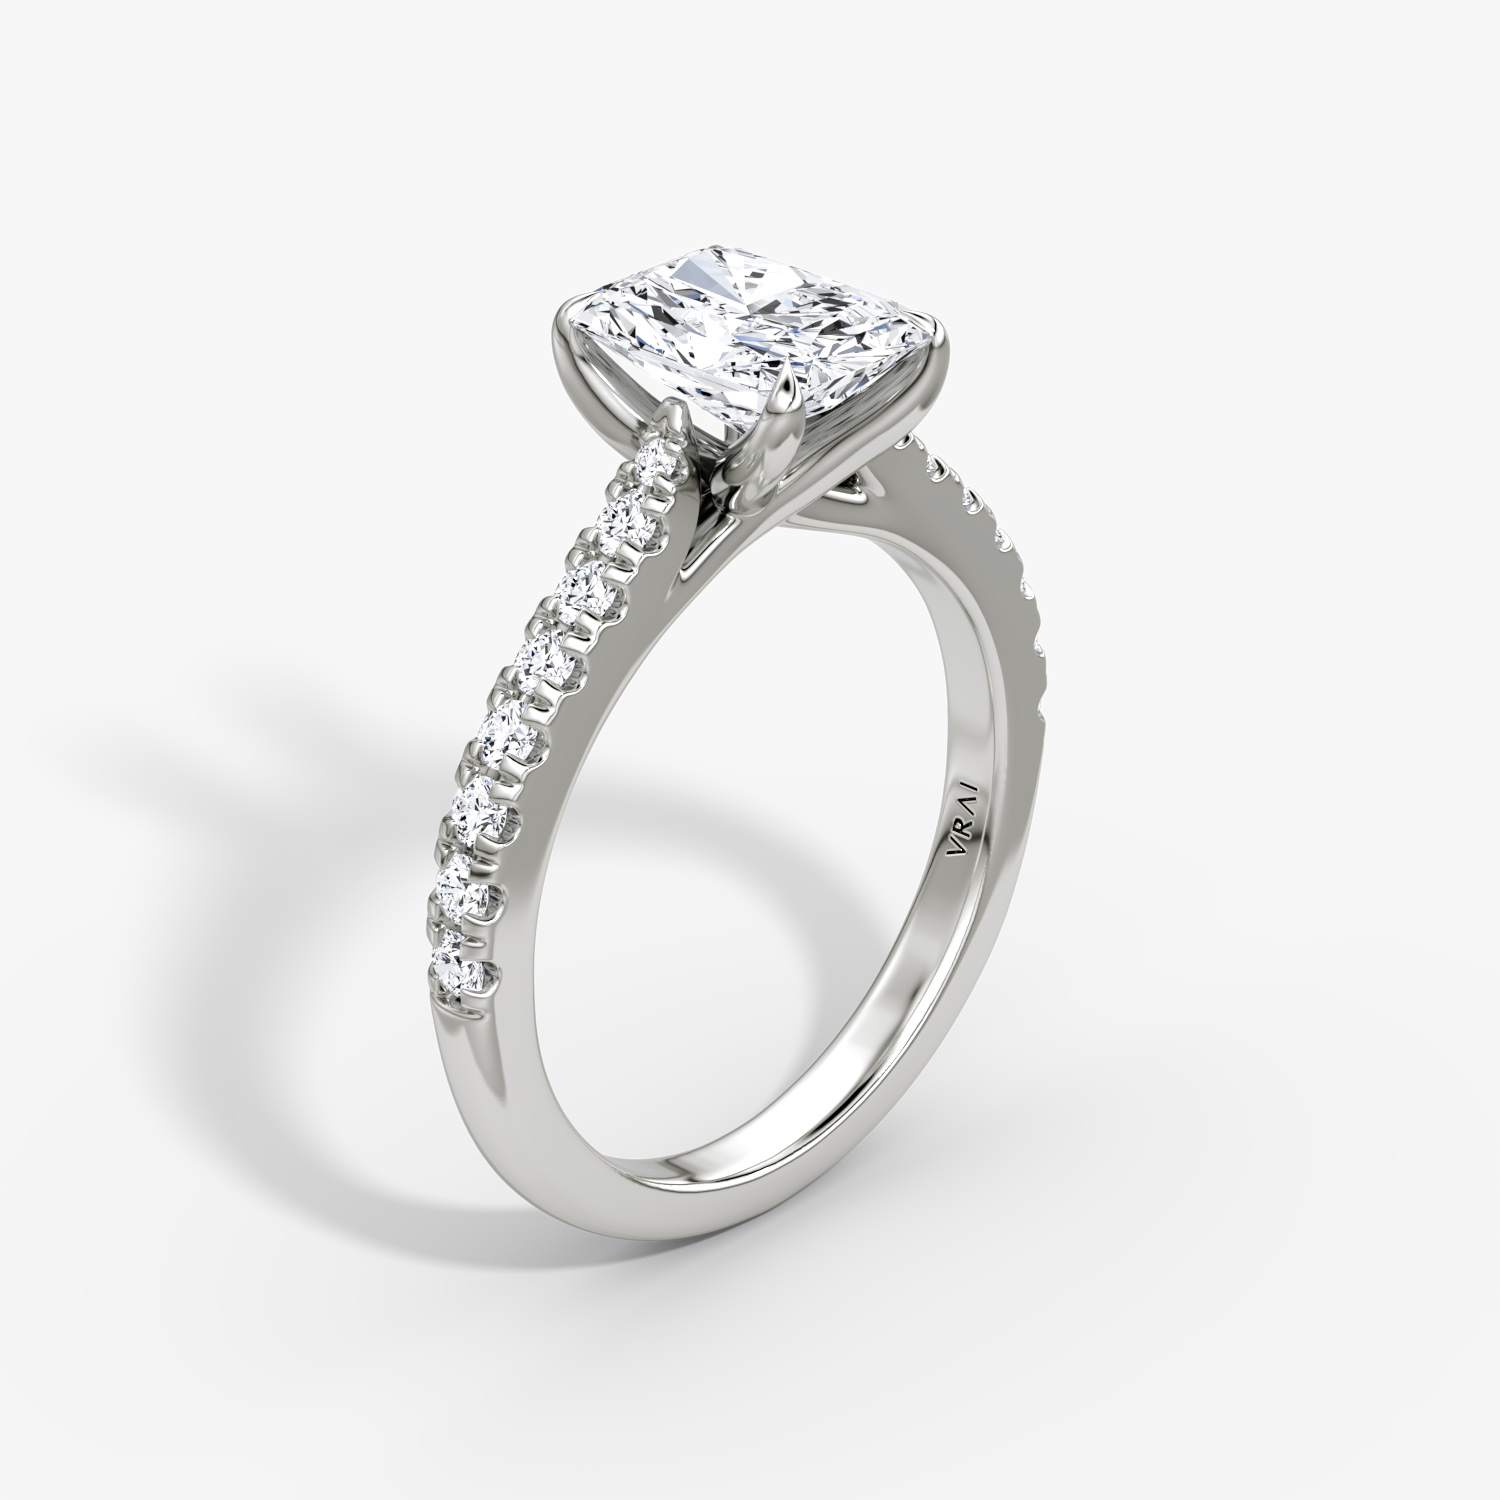 How to Care for Your Solitaire Engagement Ring